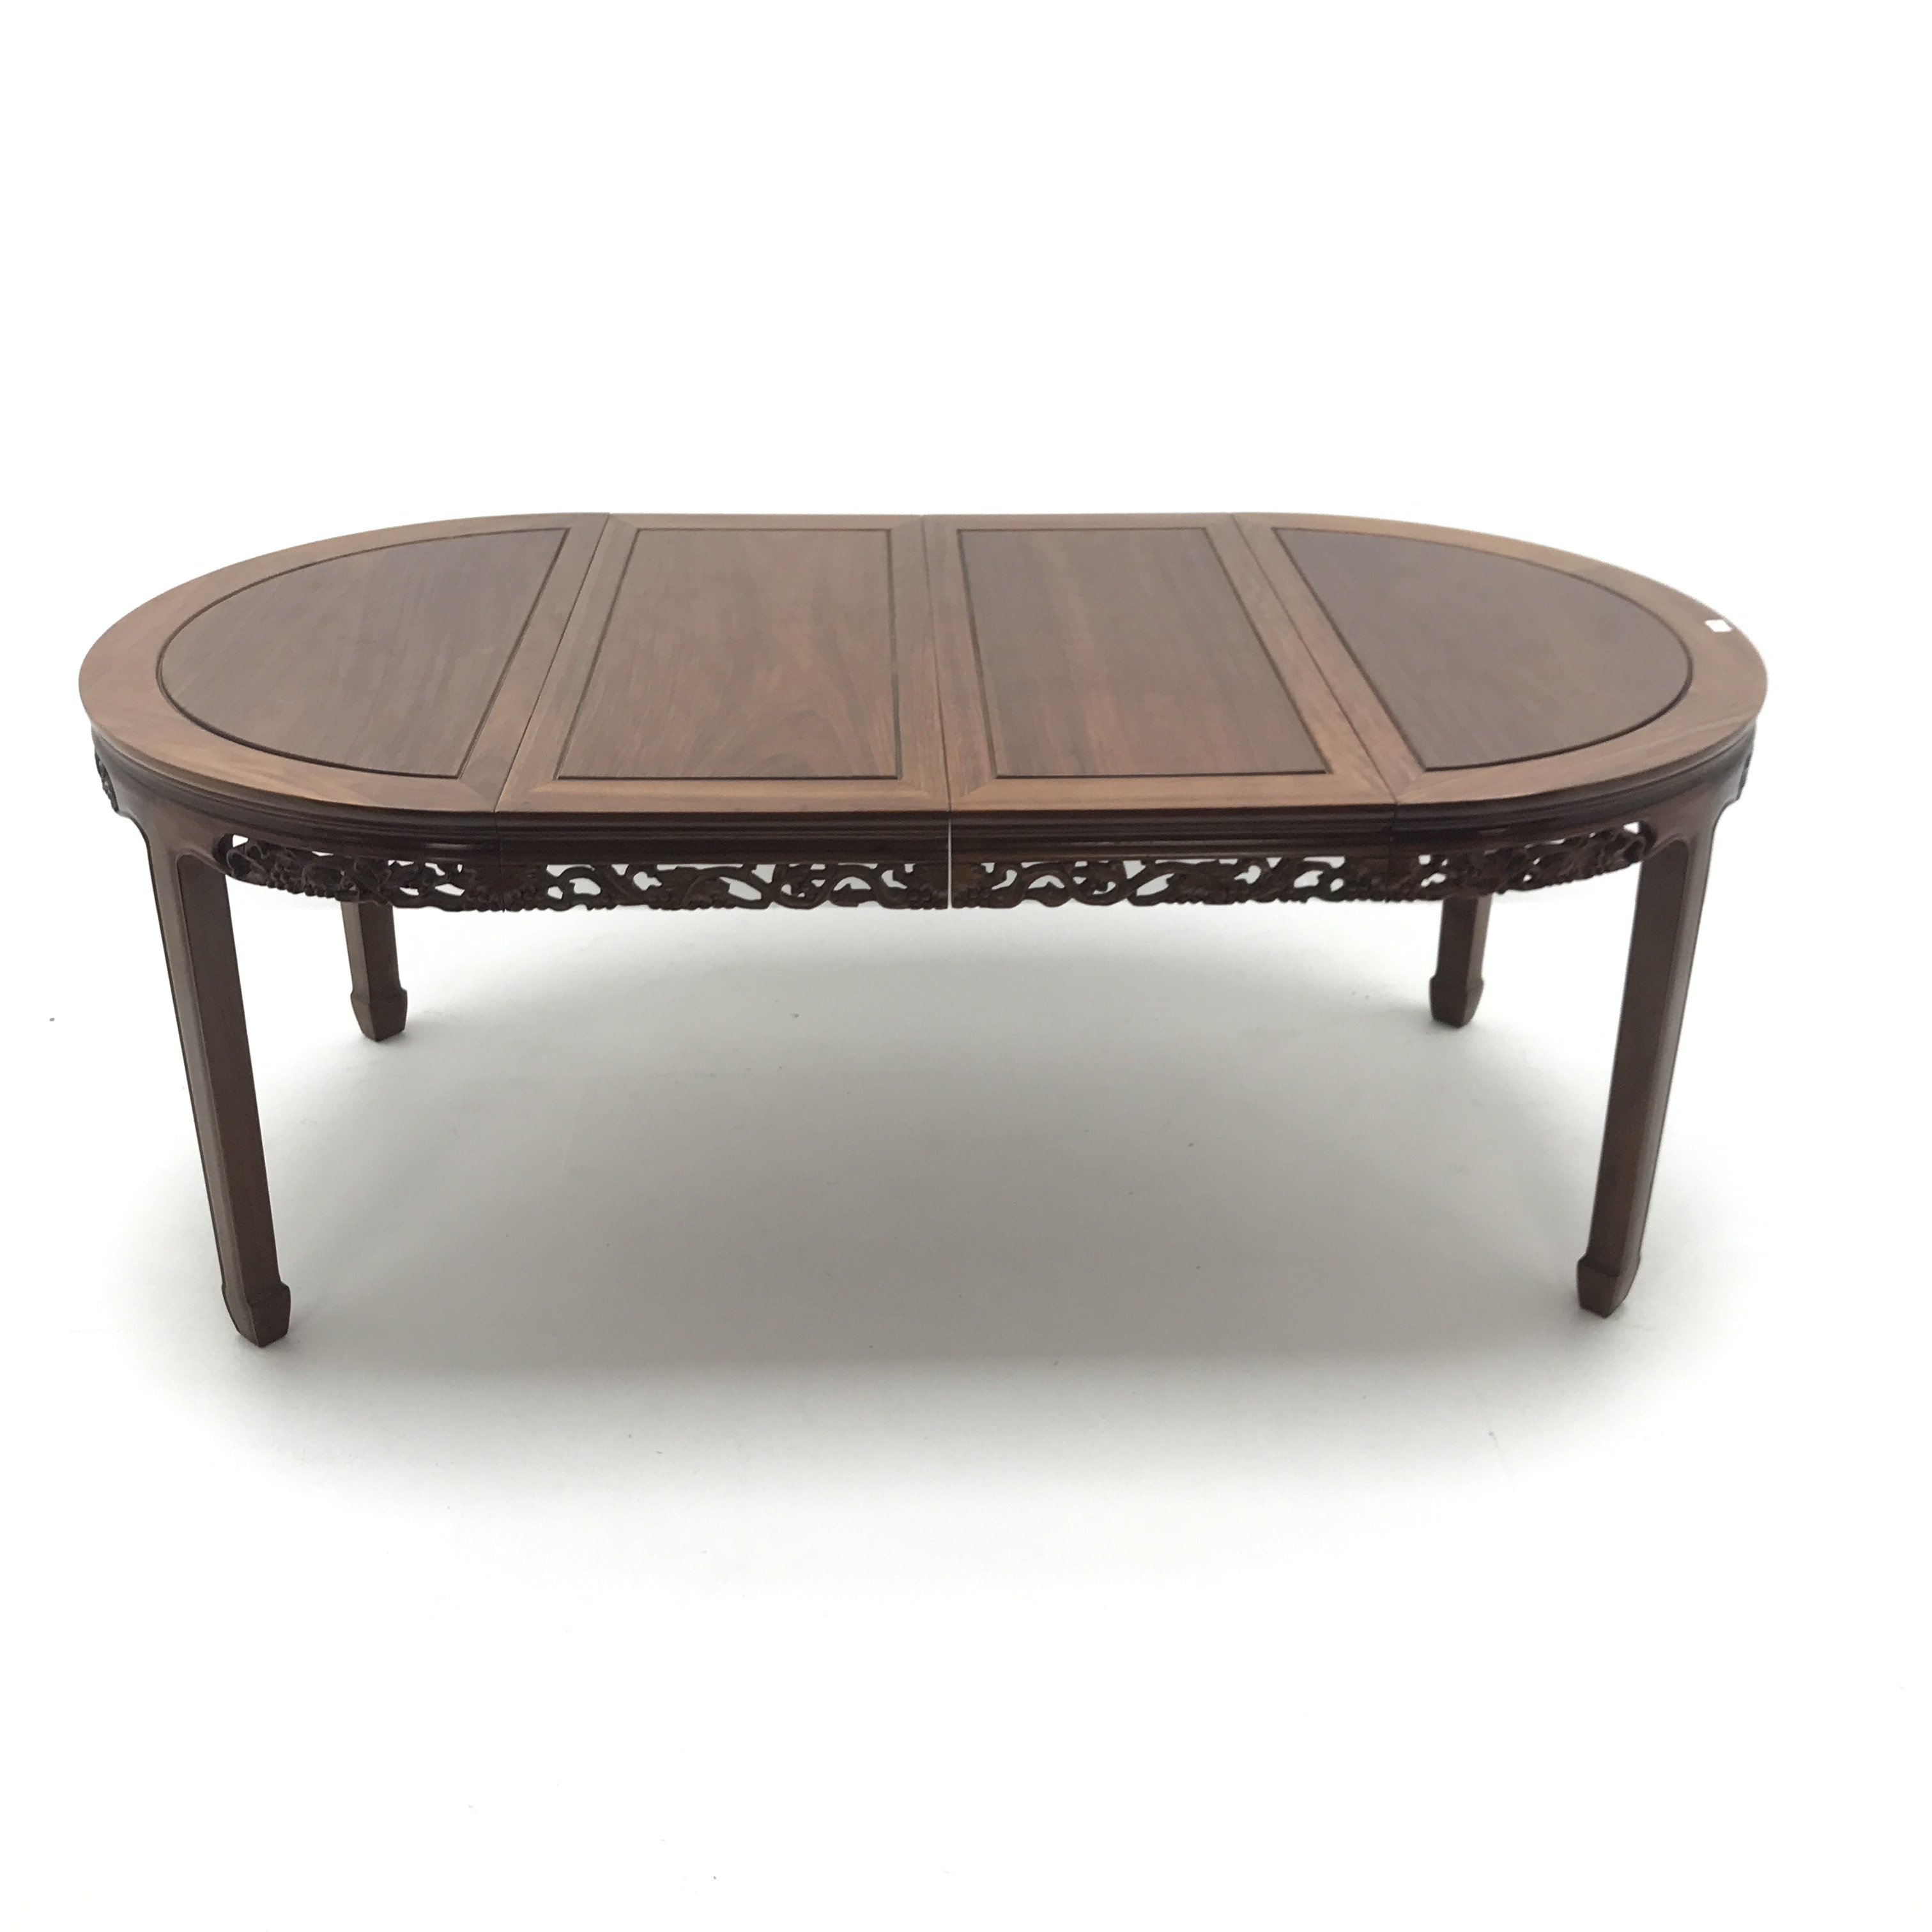 Chinese hardwood extending dining table with two leaves, pierced apron, - Image 4 of 7